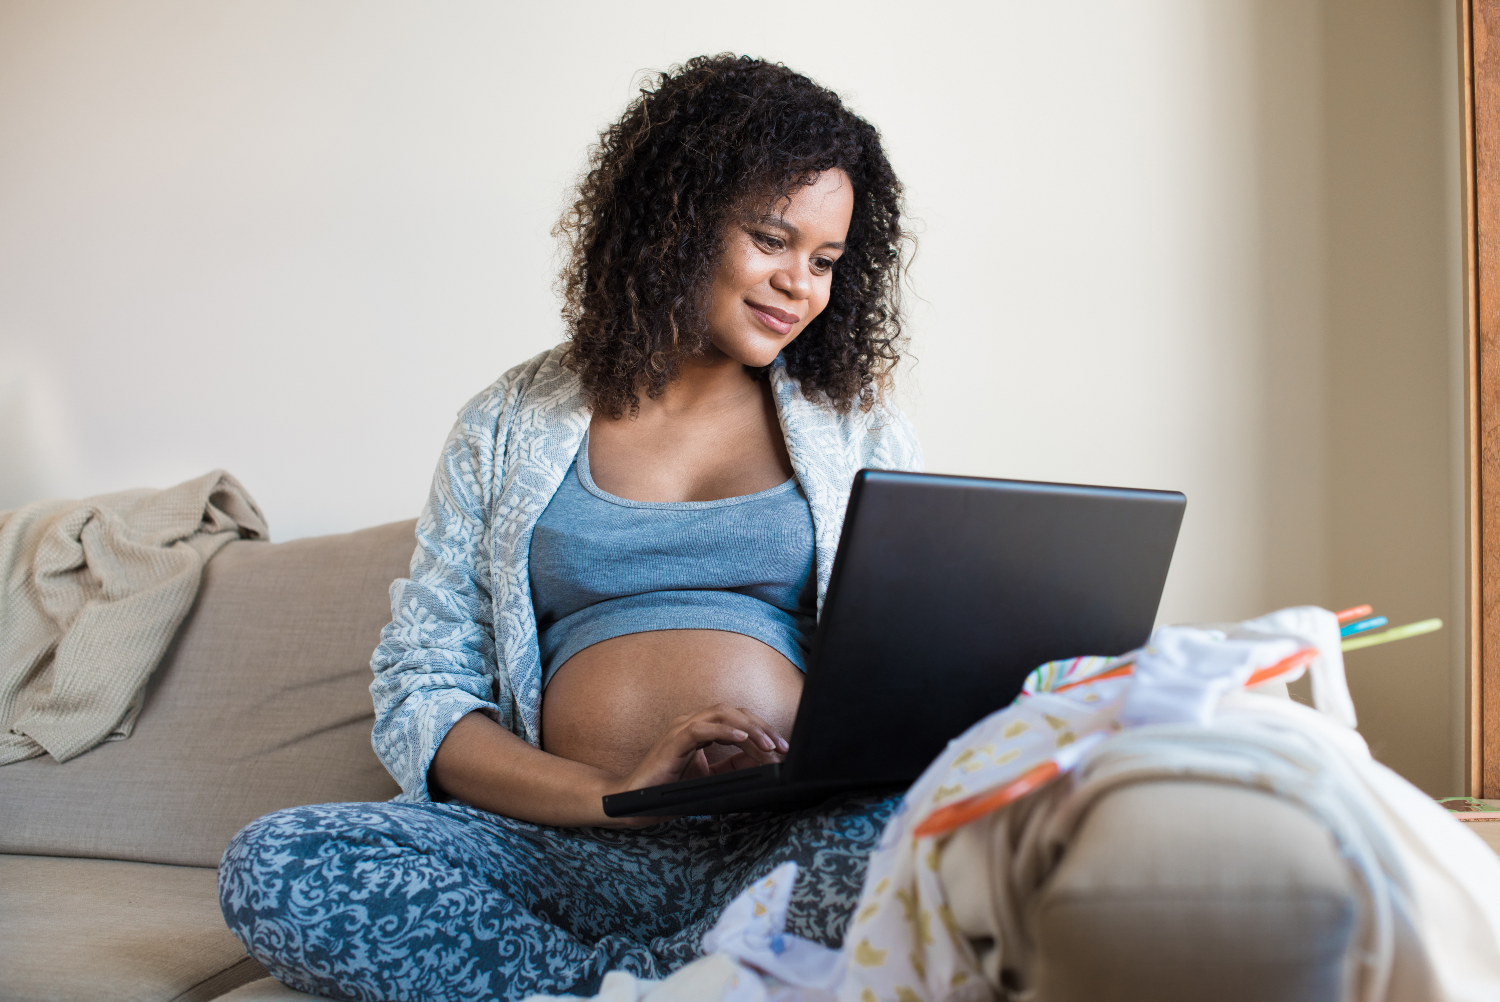 online childbirth education course